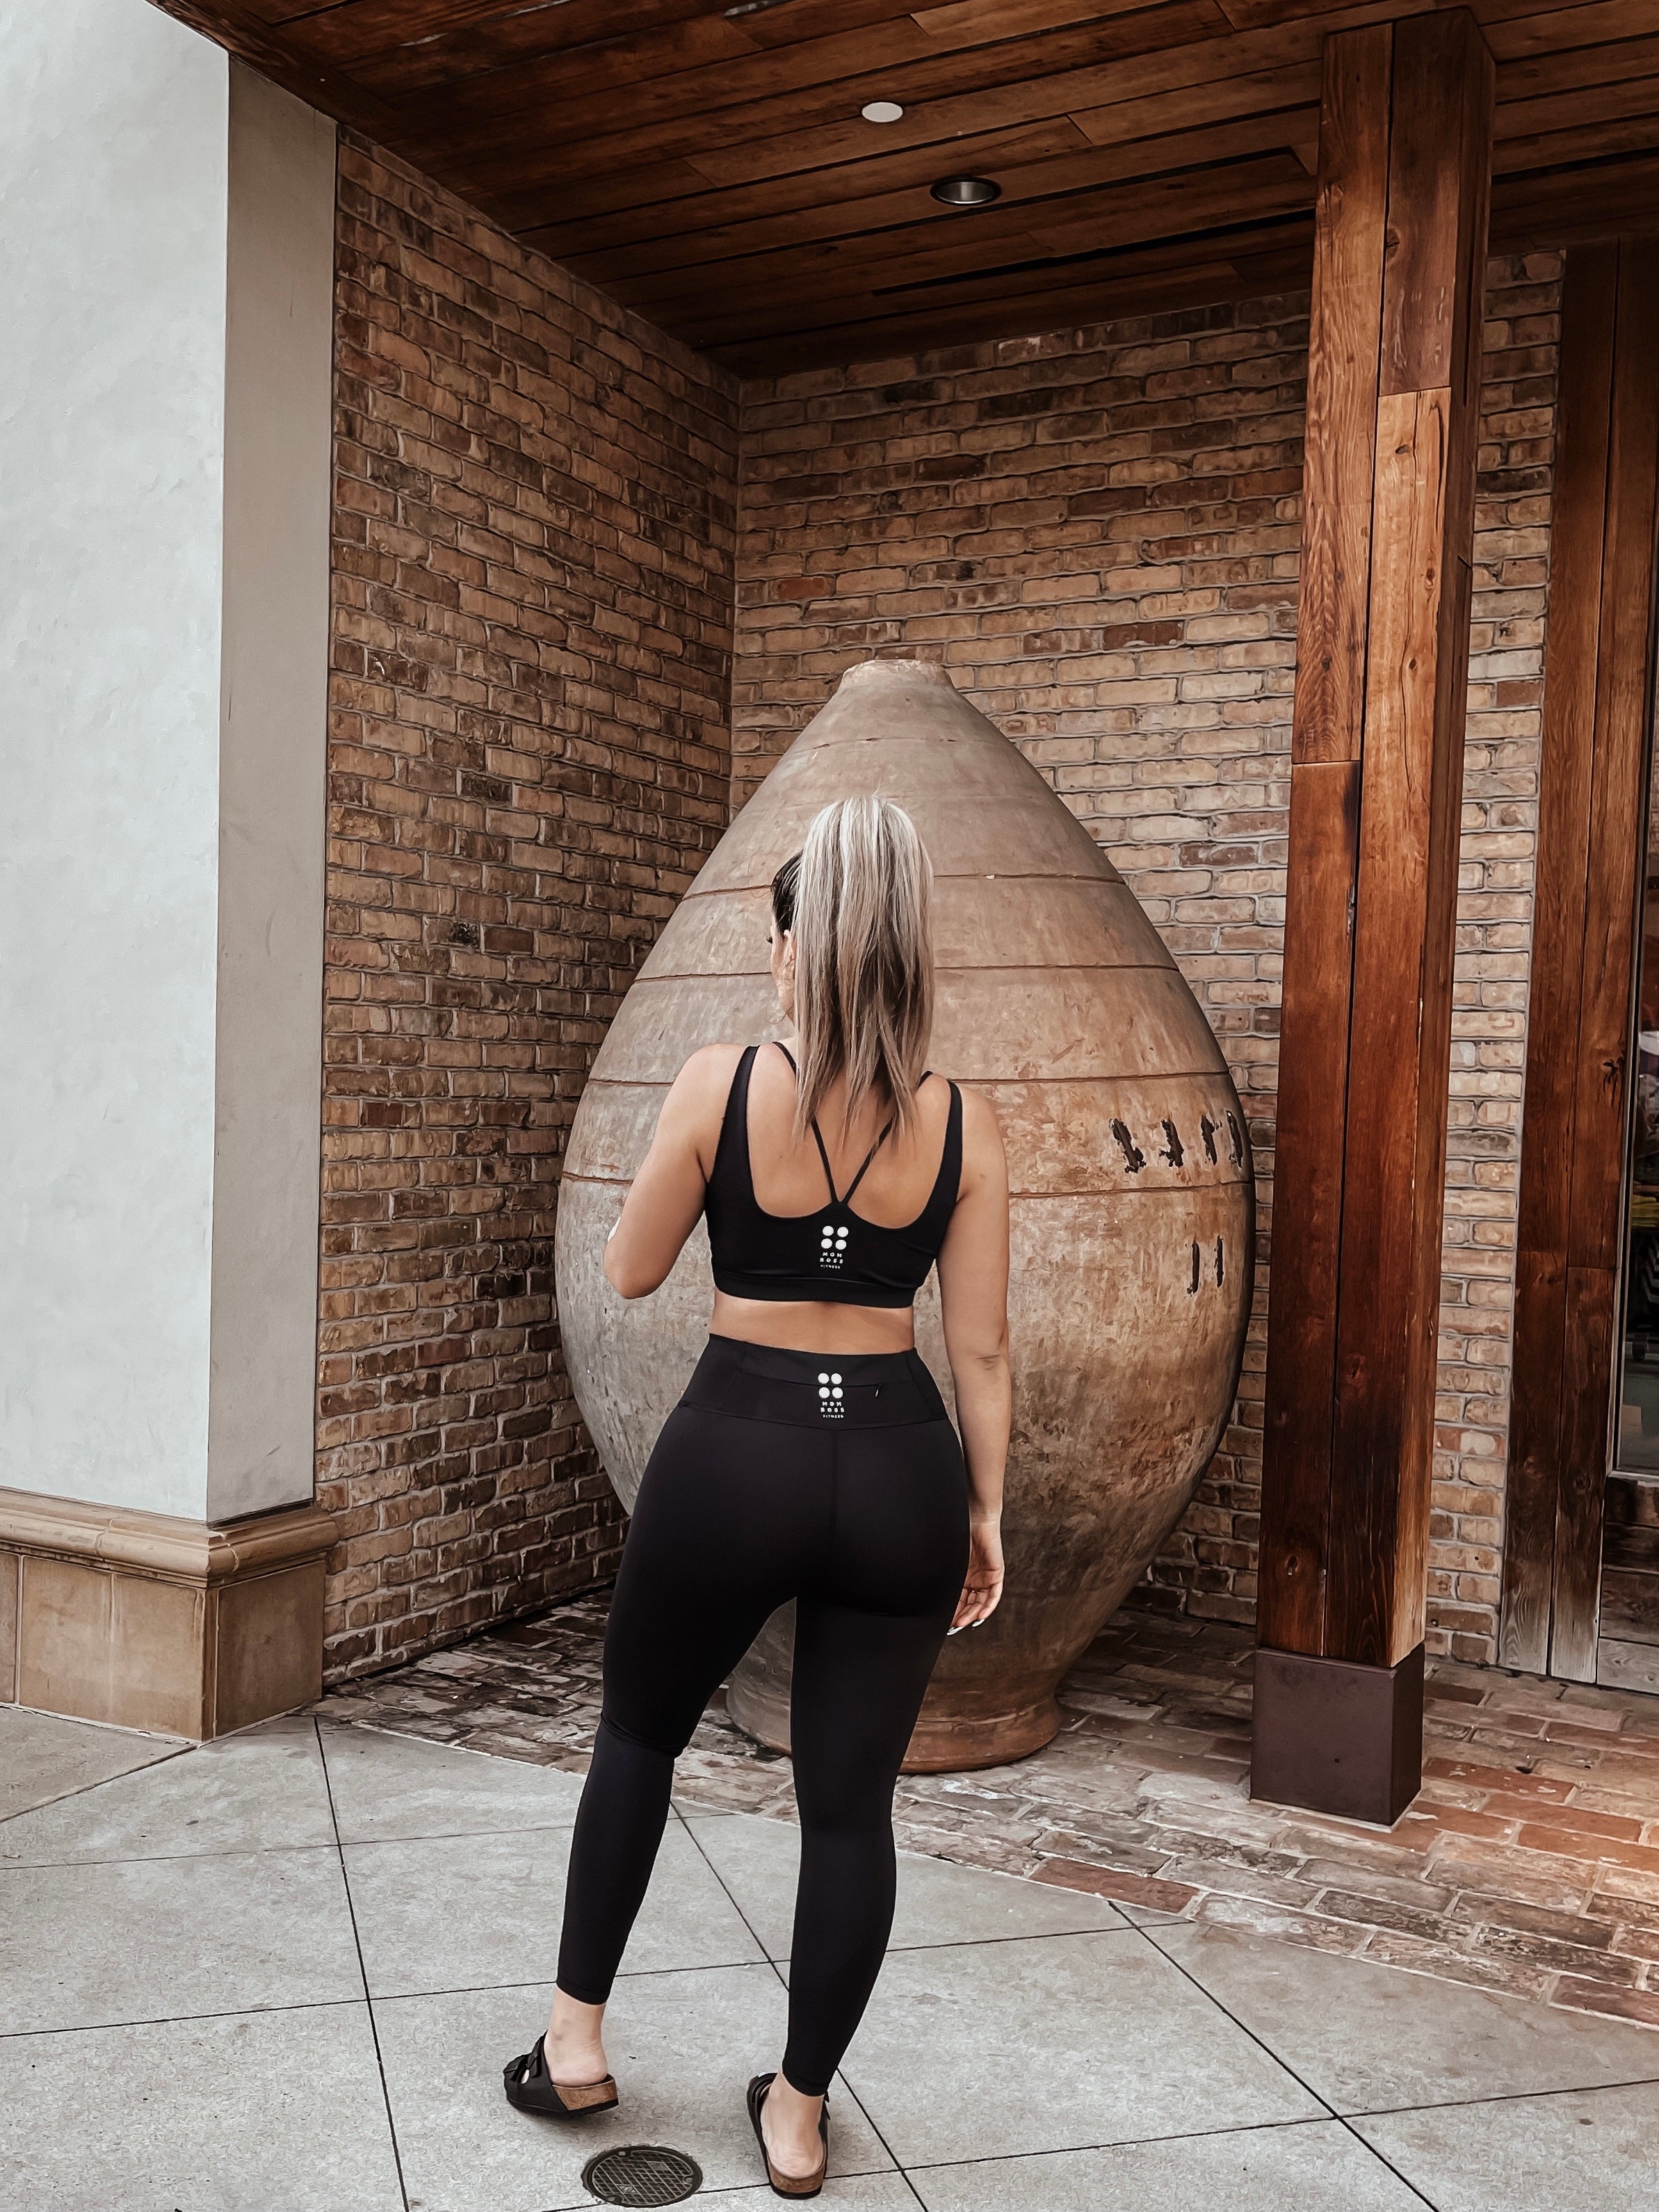 cara lowery recommends hot yoga pants pics pic